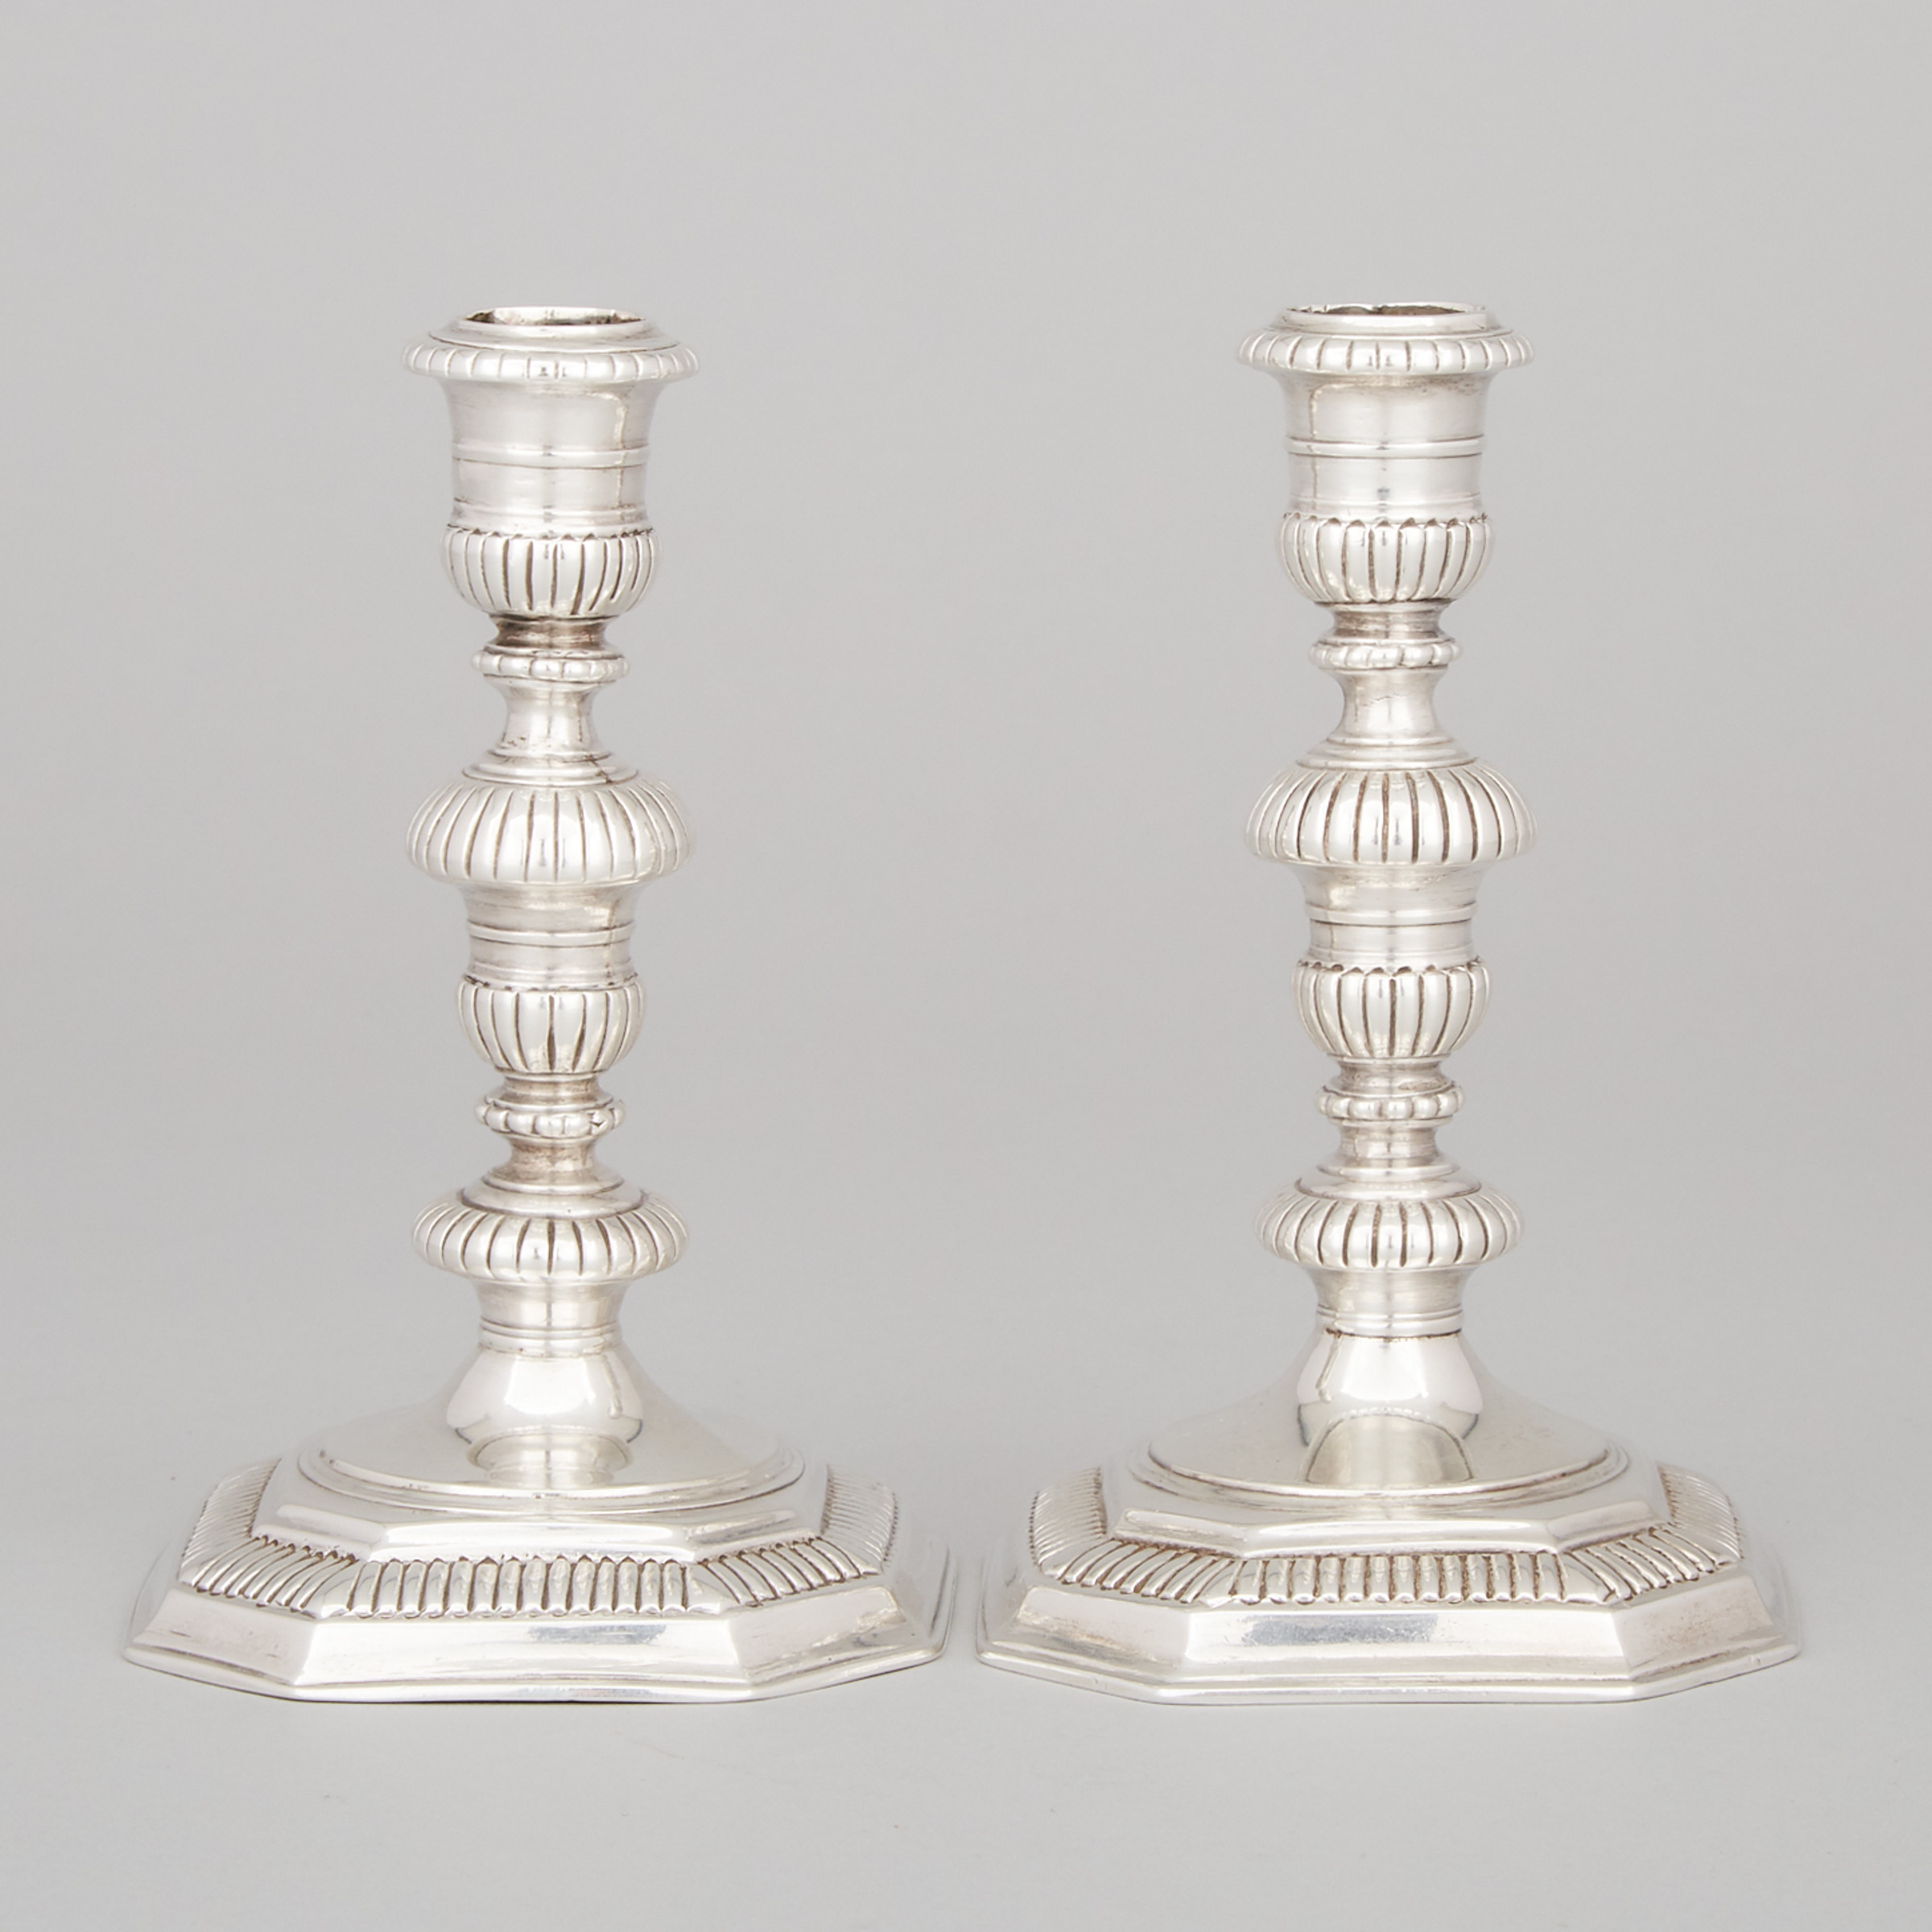 Pair of Queen Anne Silver Candlesticks, Thomas Merry I, London, 1704